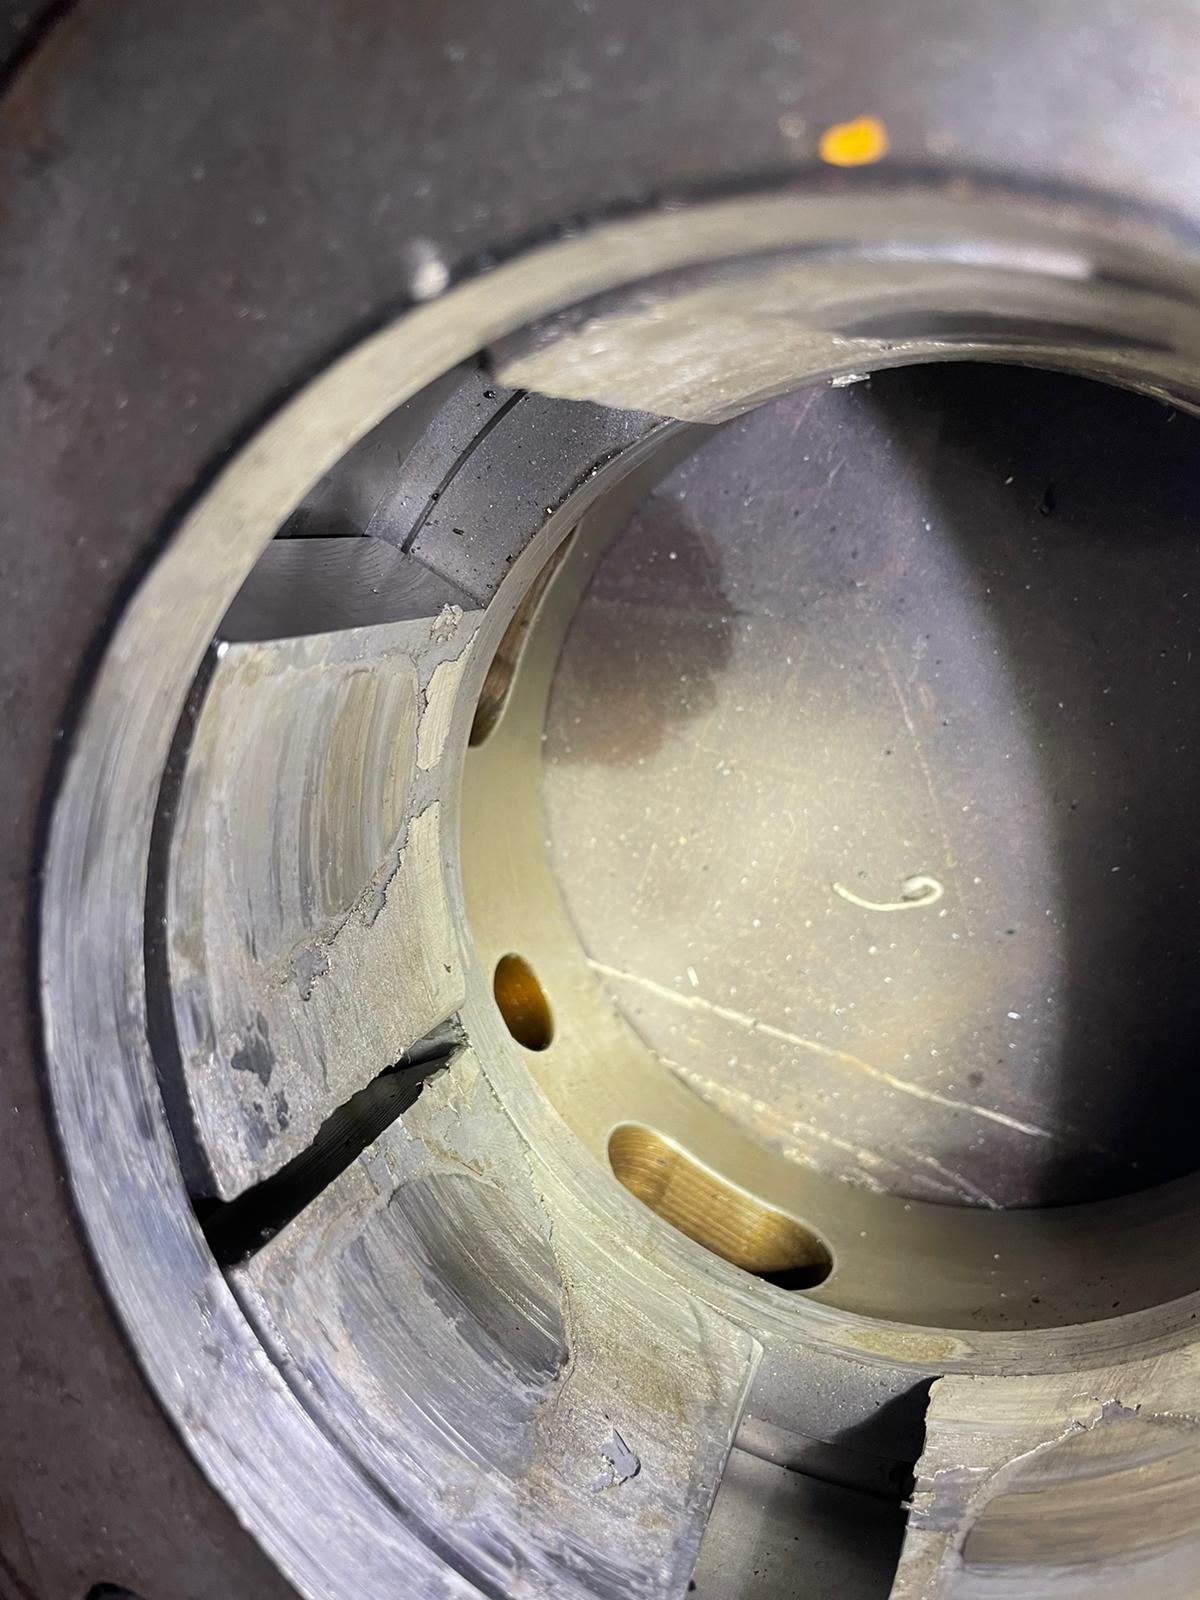 It was suspected that the rotor was incorrectly aligned during installation, which led to the impellers making contact with the casing and causing damage to the seals.